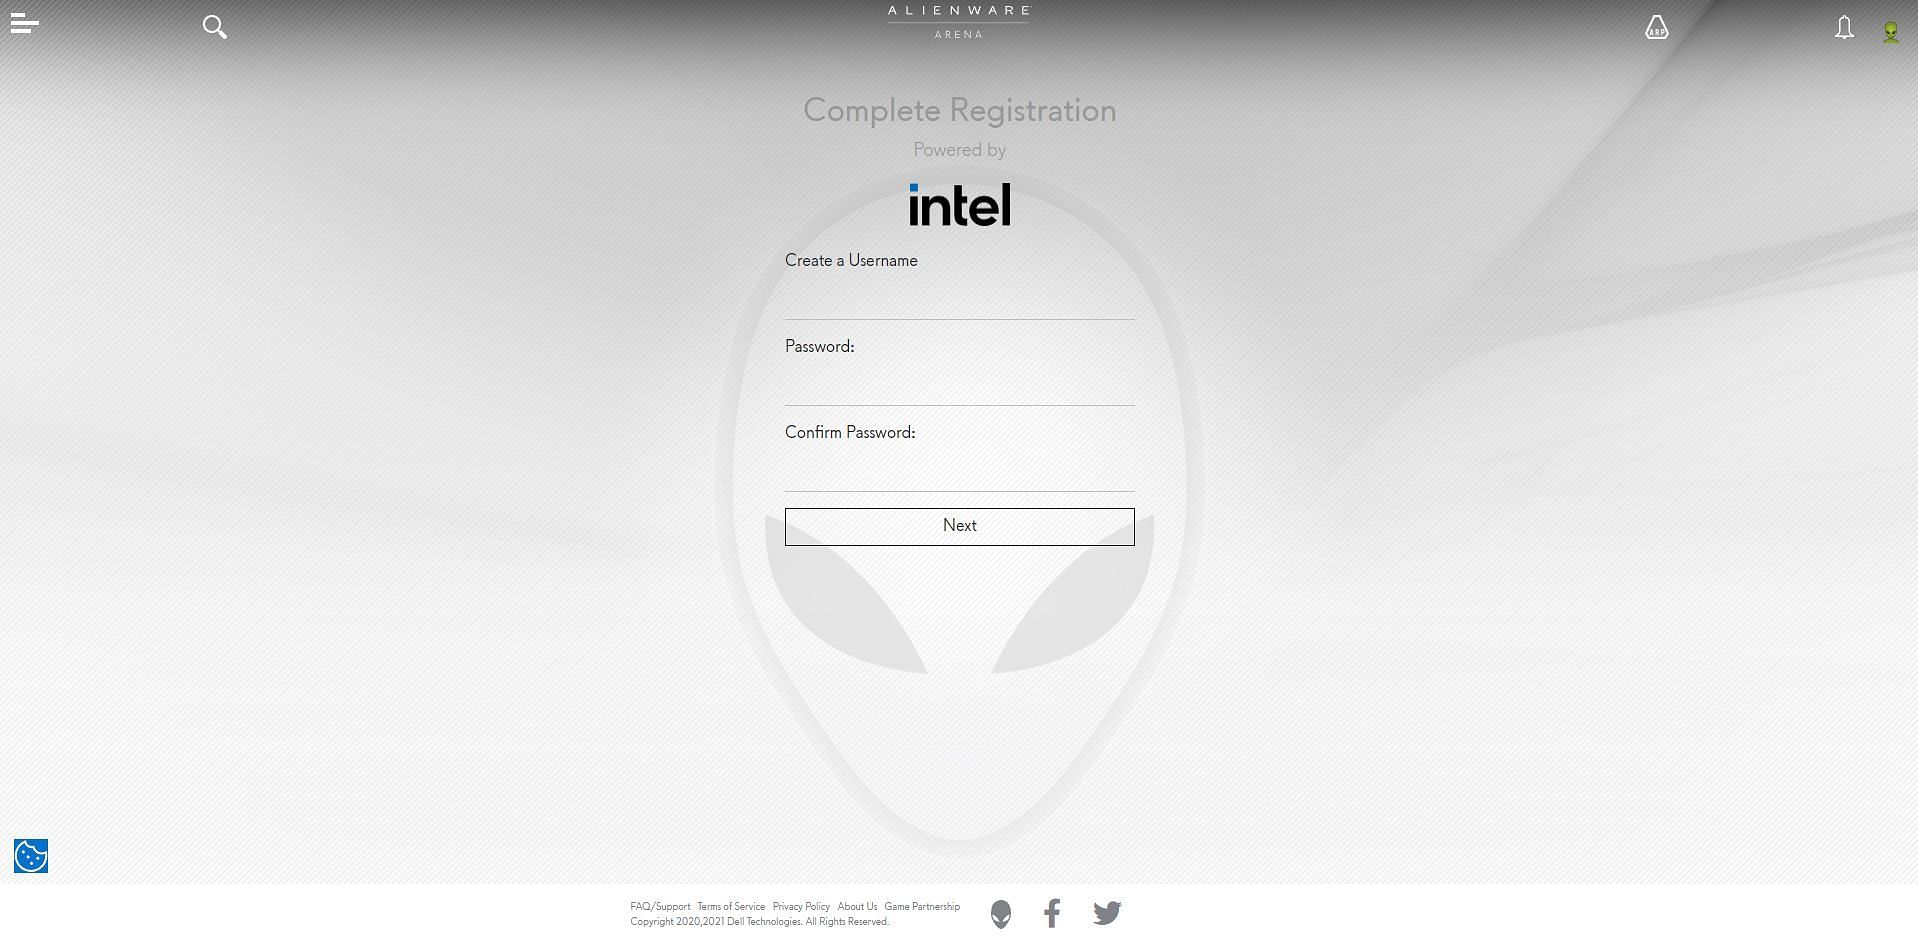 Insert all the required information into the given space (Image via Alienware Arena)